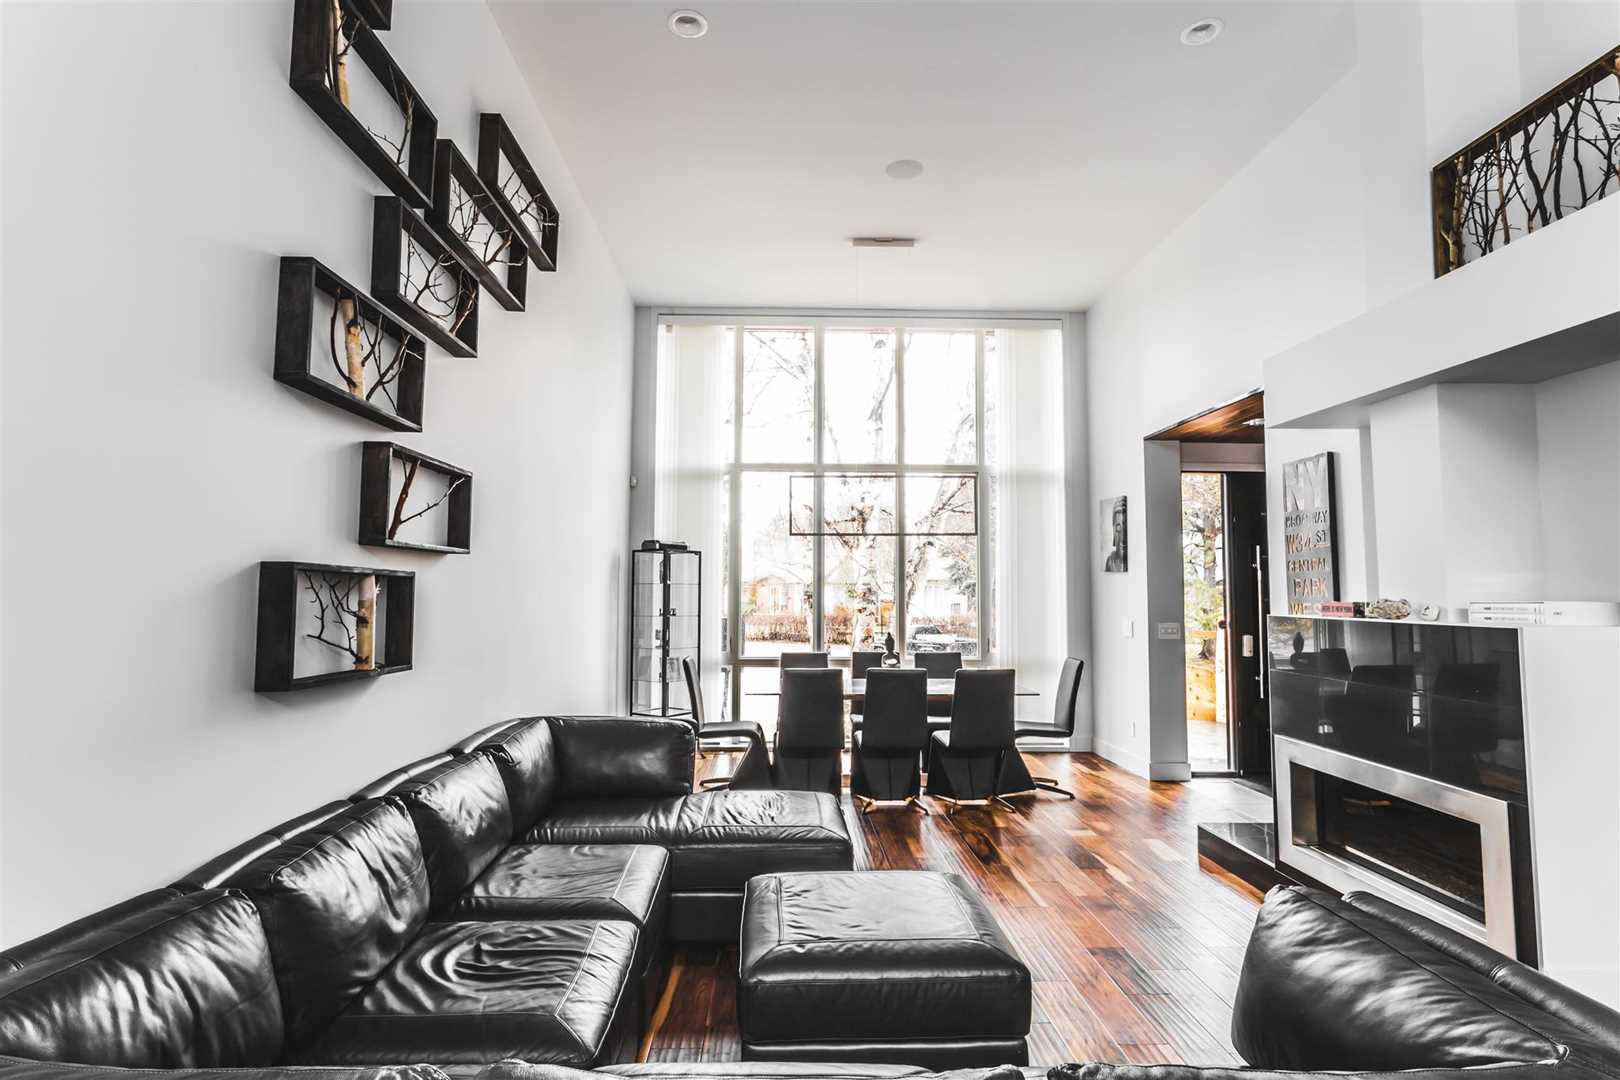 White living room facing out through floor-to-ceiling windows, hardwood floors; black sectional on left with framed tree branches above; fireplace on right